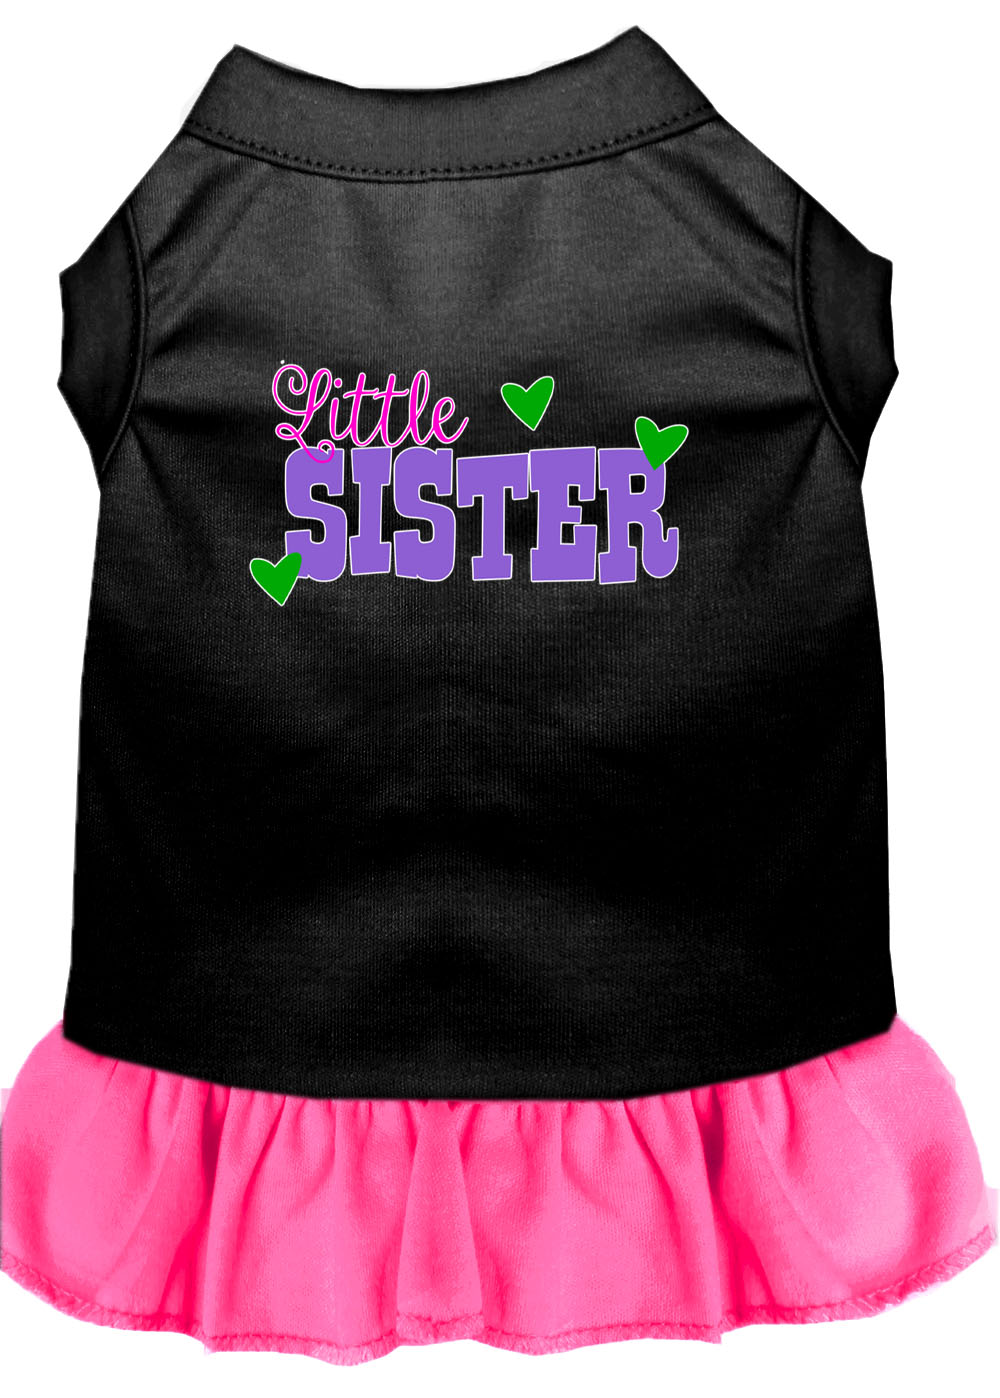 Little Sister Screen Print Dog Dress Black with Bright Pink XS